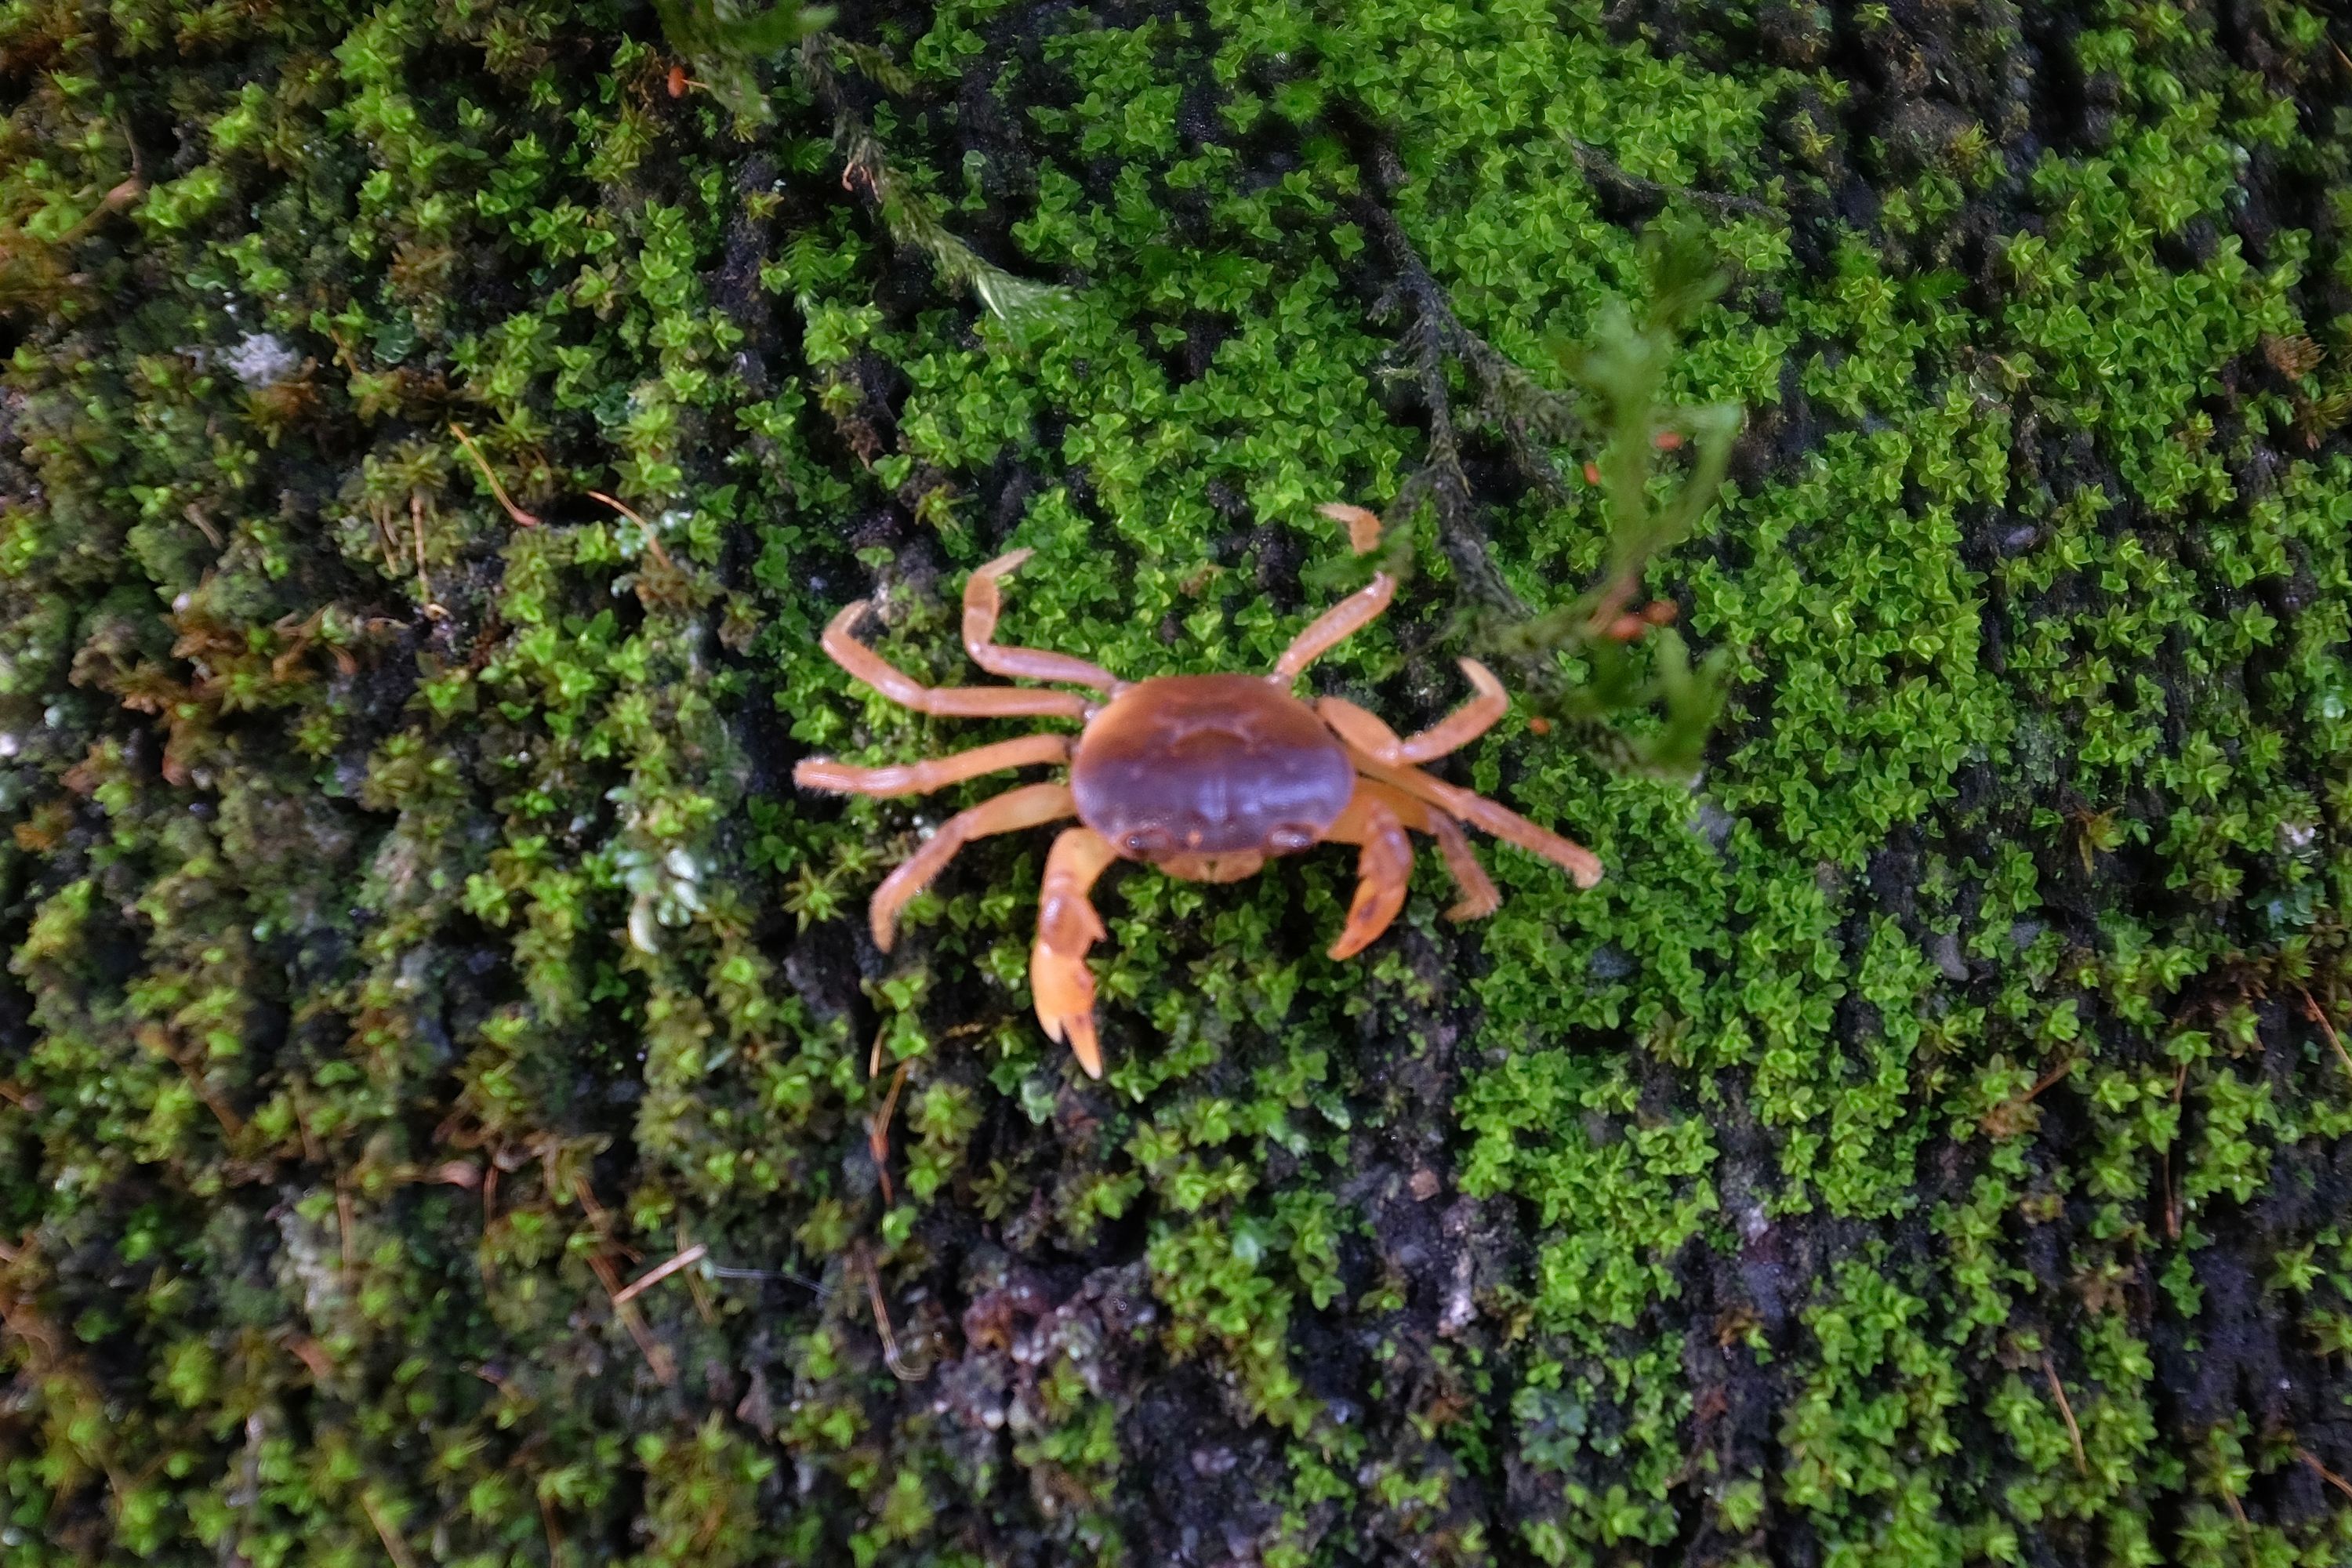 A red land crab walks across a moss-covered rock.